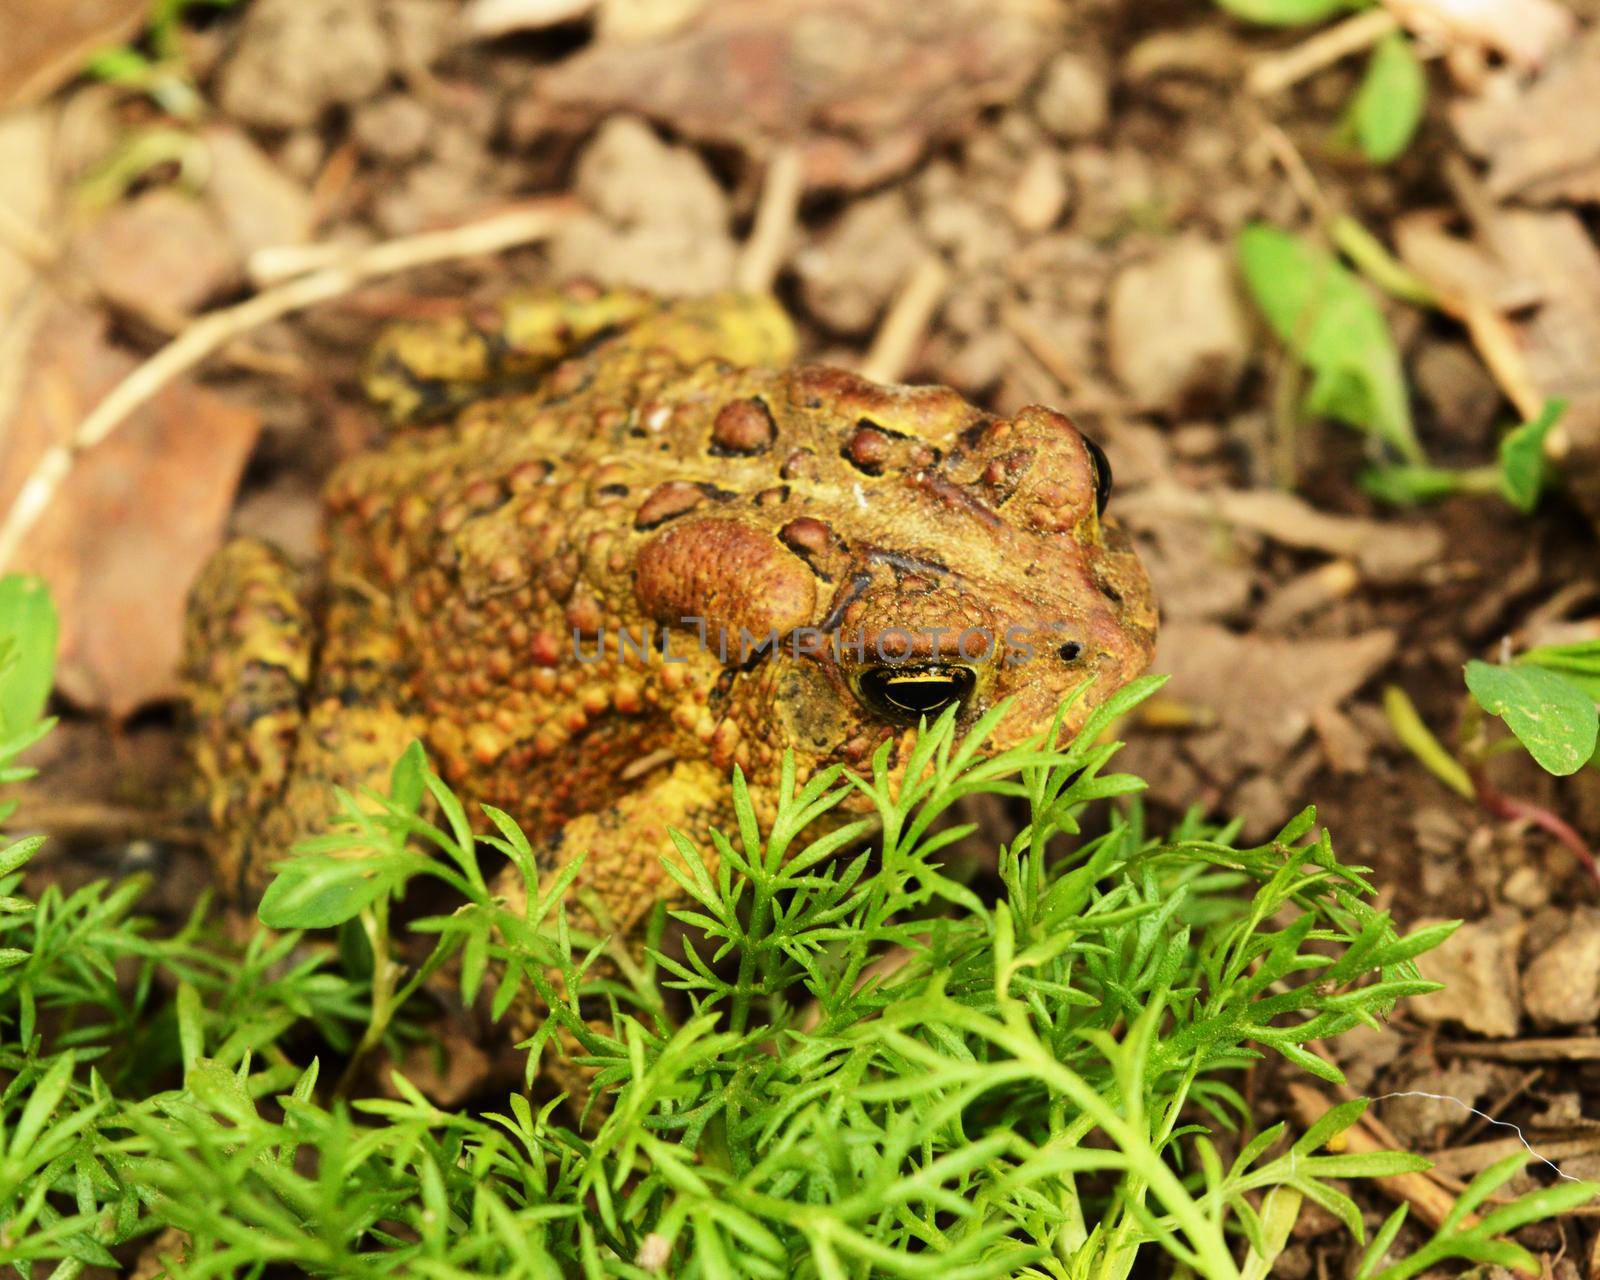 Closeup image of an American Toad on the dirty ground during the daytime hours.